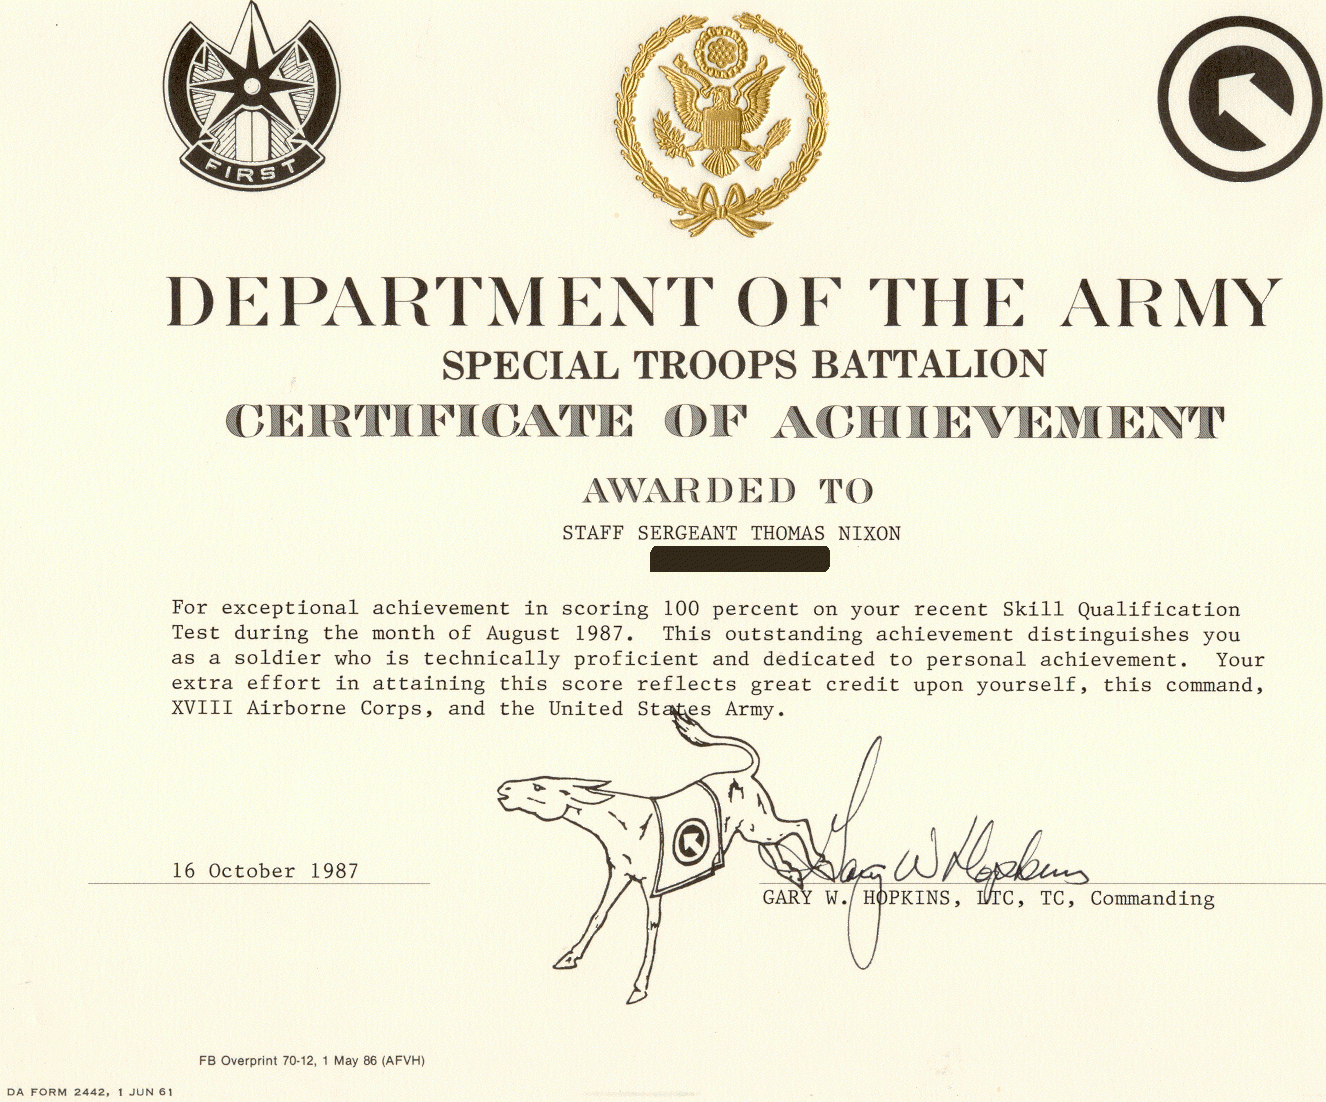 014 Template Ideas Army Certificate Of Achievement Microsoft Regarding Certificate Of Achievement Army Template